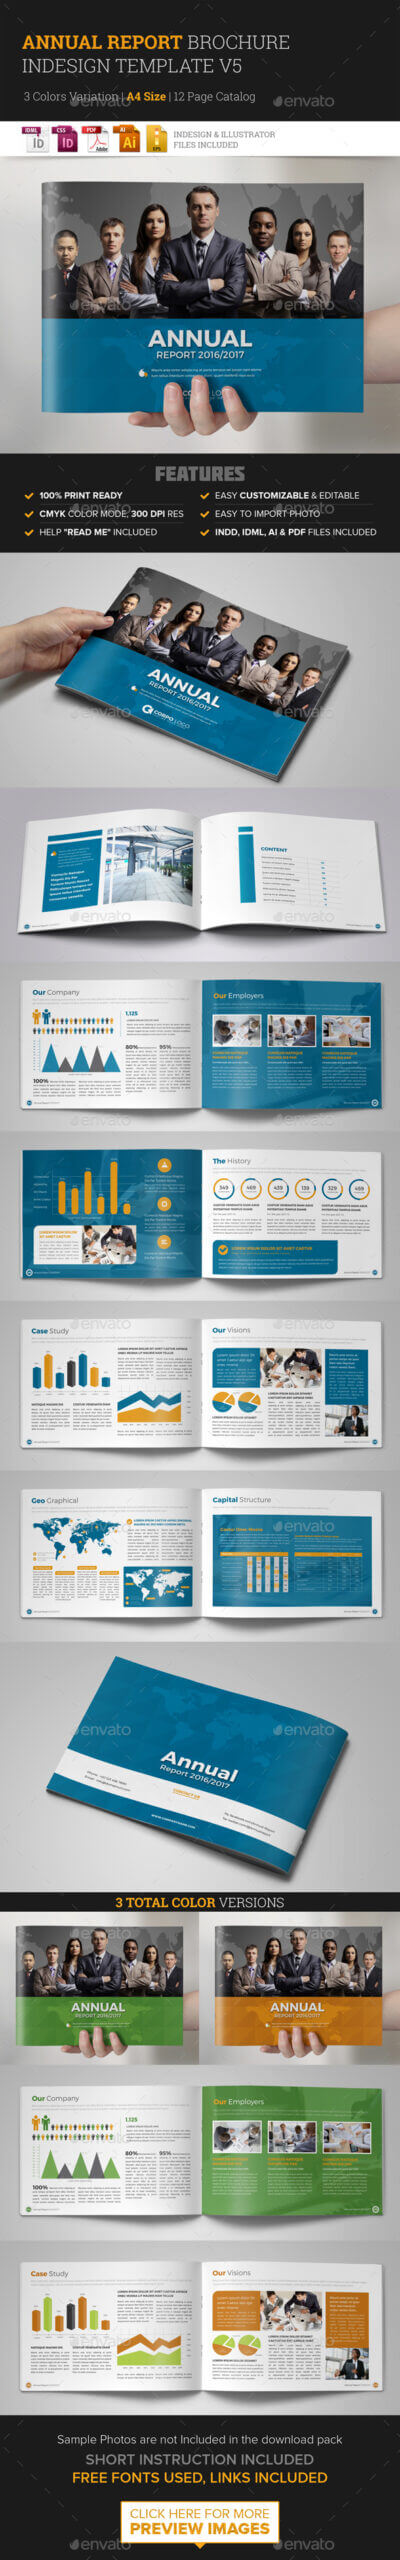 Annual Report Template Indesign Graphics, Designs & Templates Pertaining To Free Annual Report Template Indesign